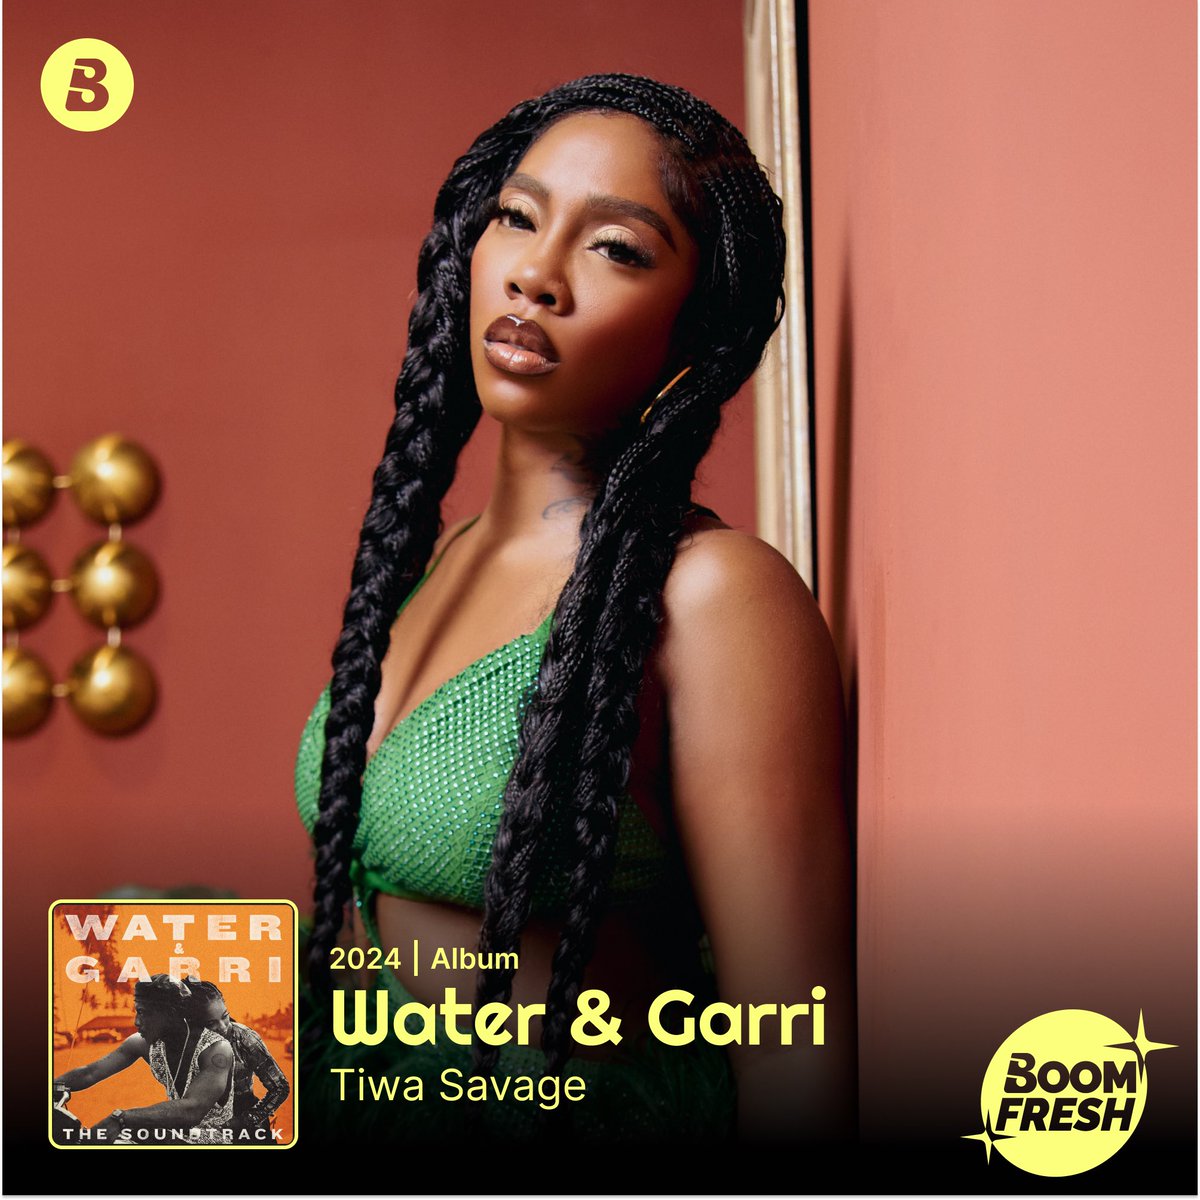 The Queen @TiwaSavage drops the highly anticipated #WaterAndGarri OST album, and we are loving it! 👸🏾🔥

Listen to this body of work on Boomplay! ➡️ boom.lnk.to/TiwaSavageWate…

#BoomFresh #HomeOfMusic #Boomplay #TiwaSavage